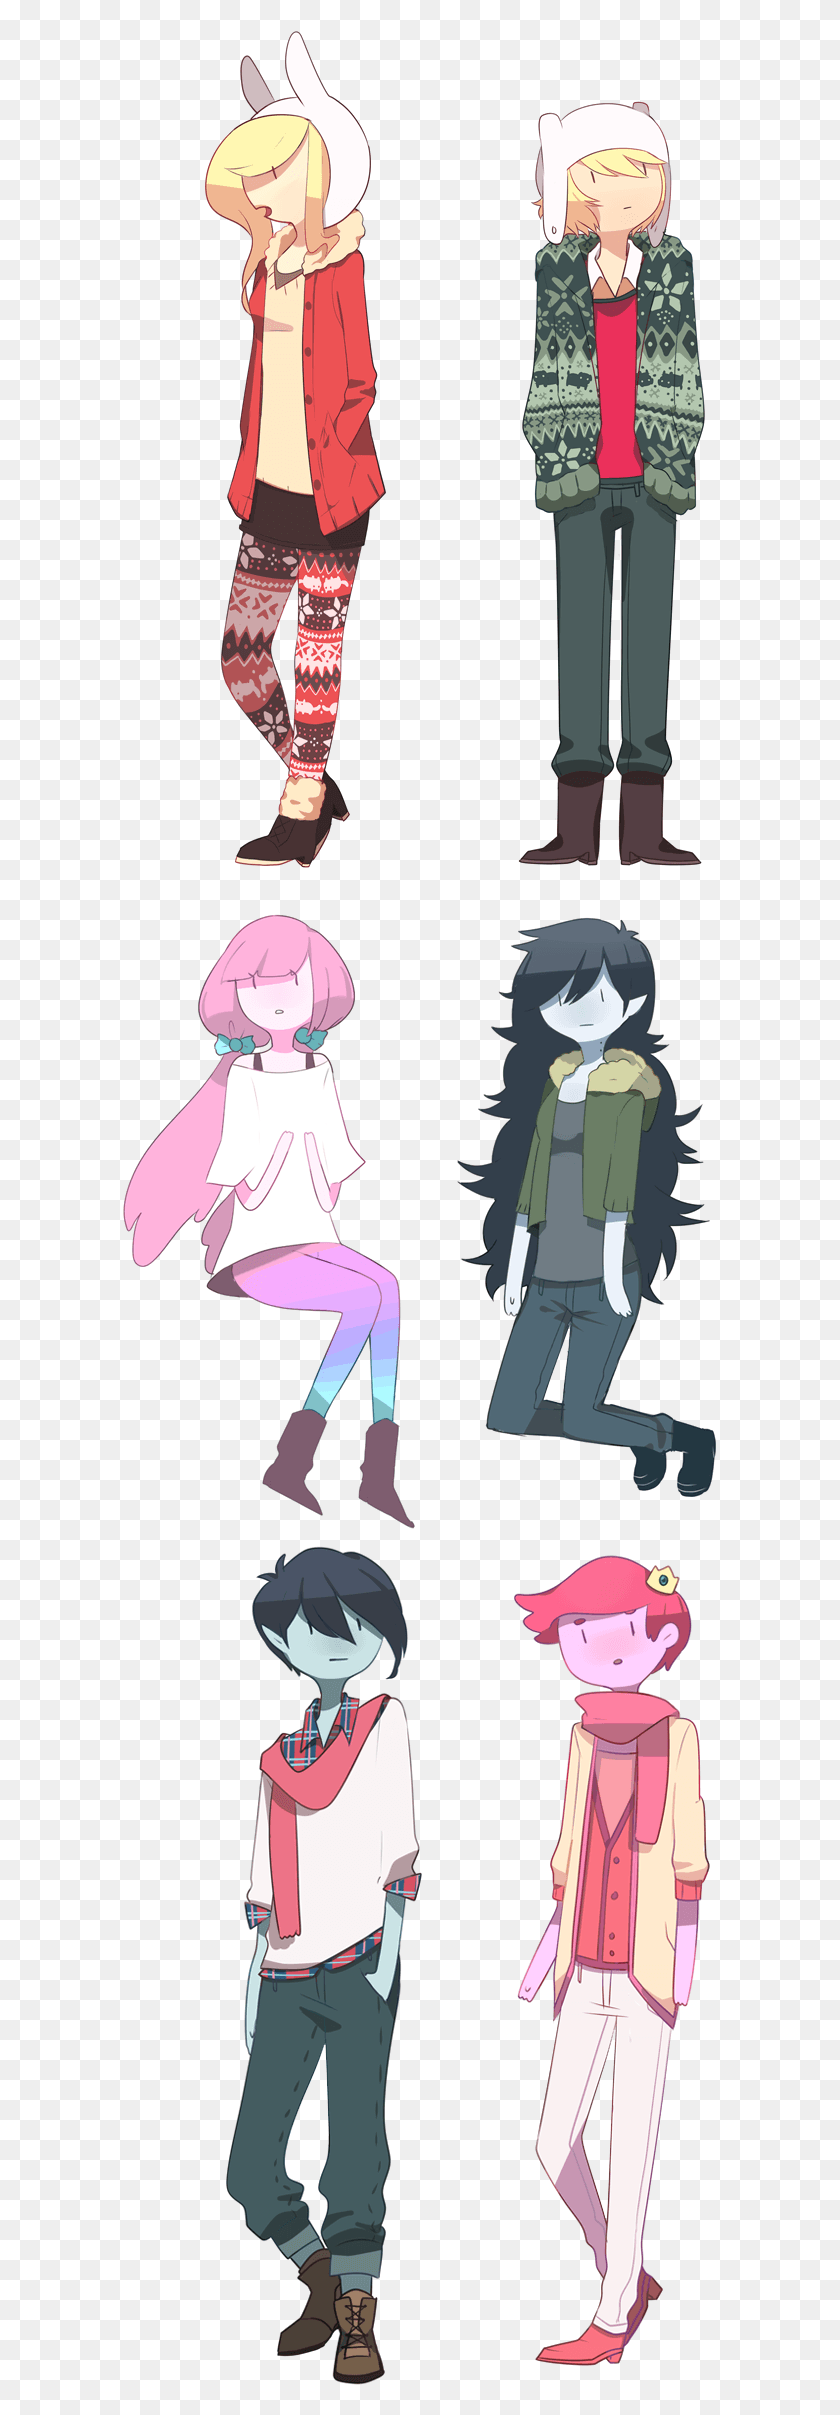 595x2355 Hipster Adventure Time Characters Hipster Adventure Time, Person, Human, Comics Descargar Hd Png